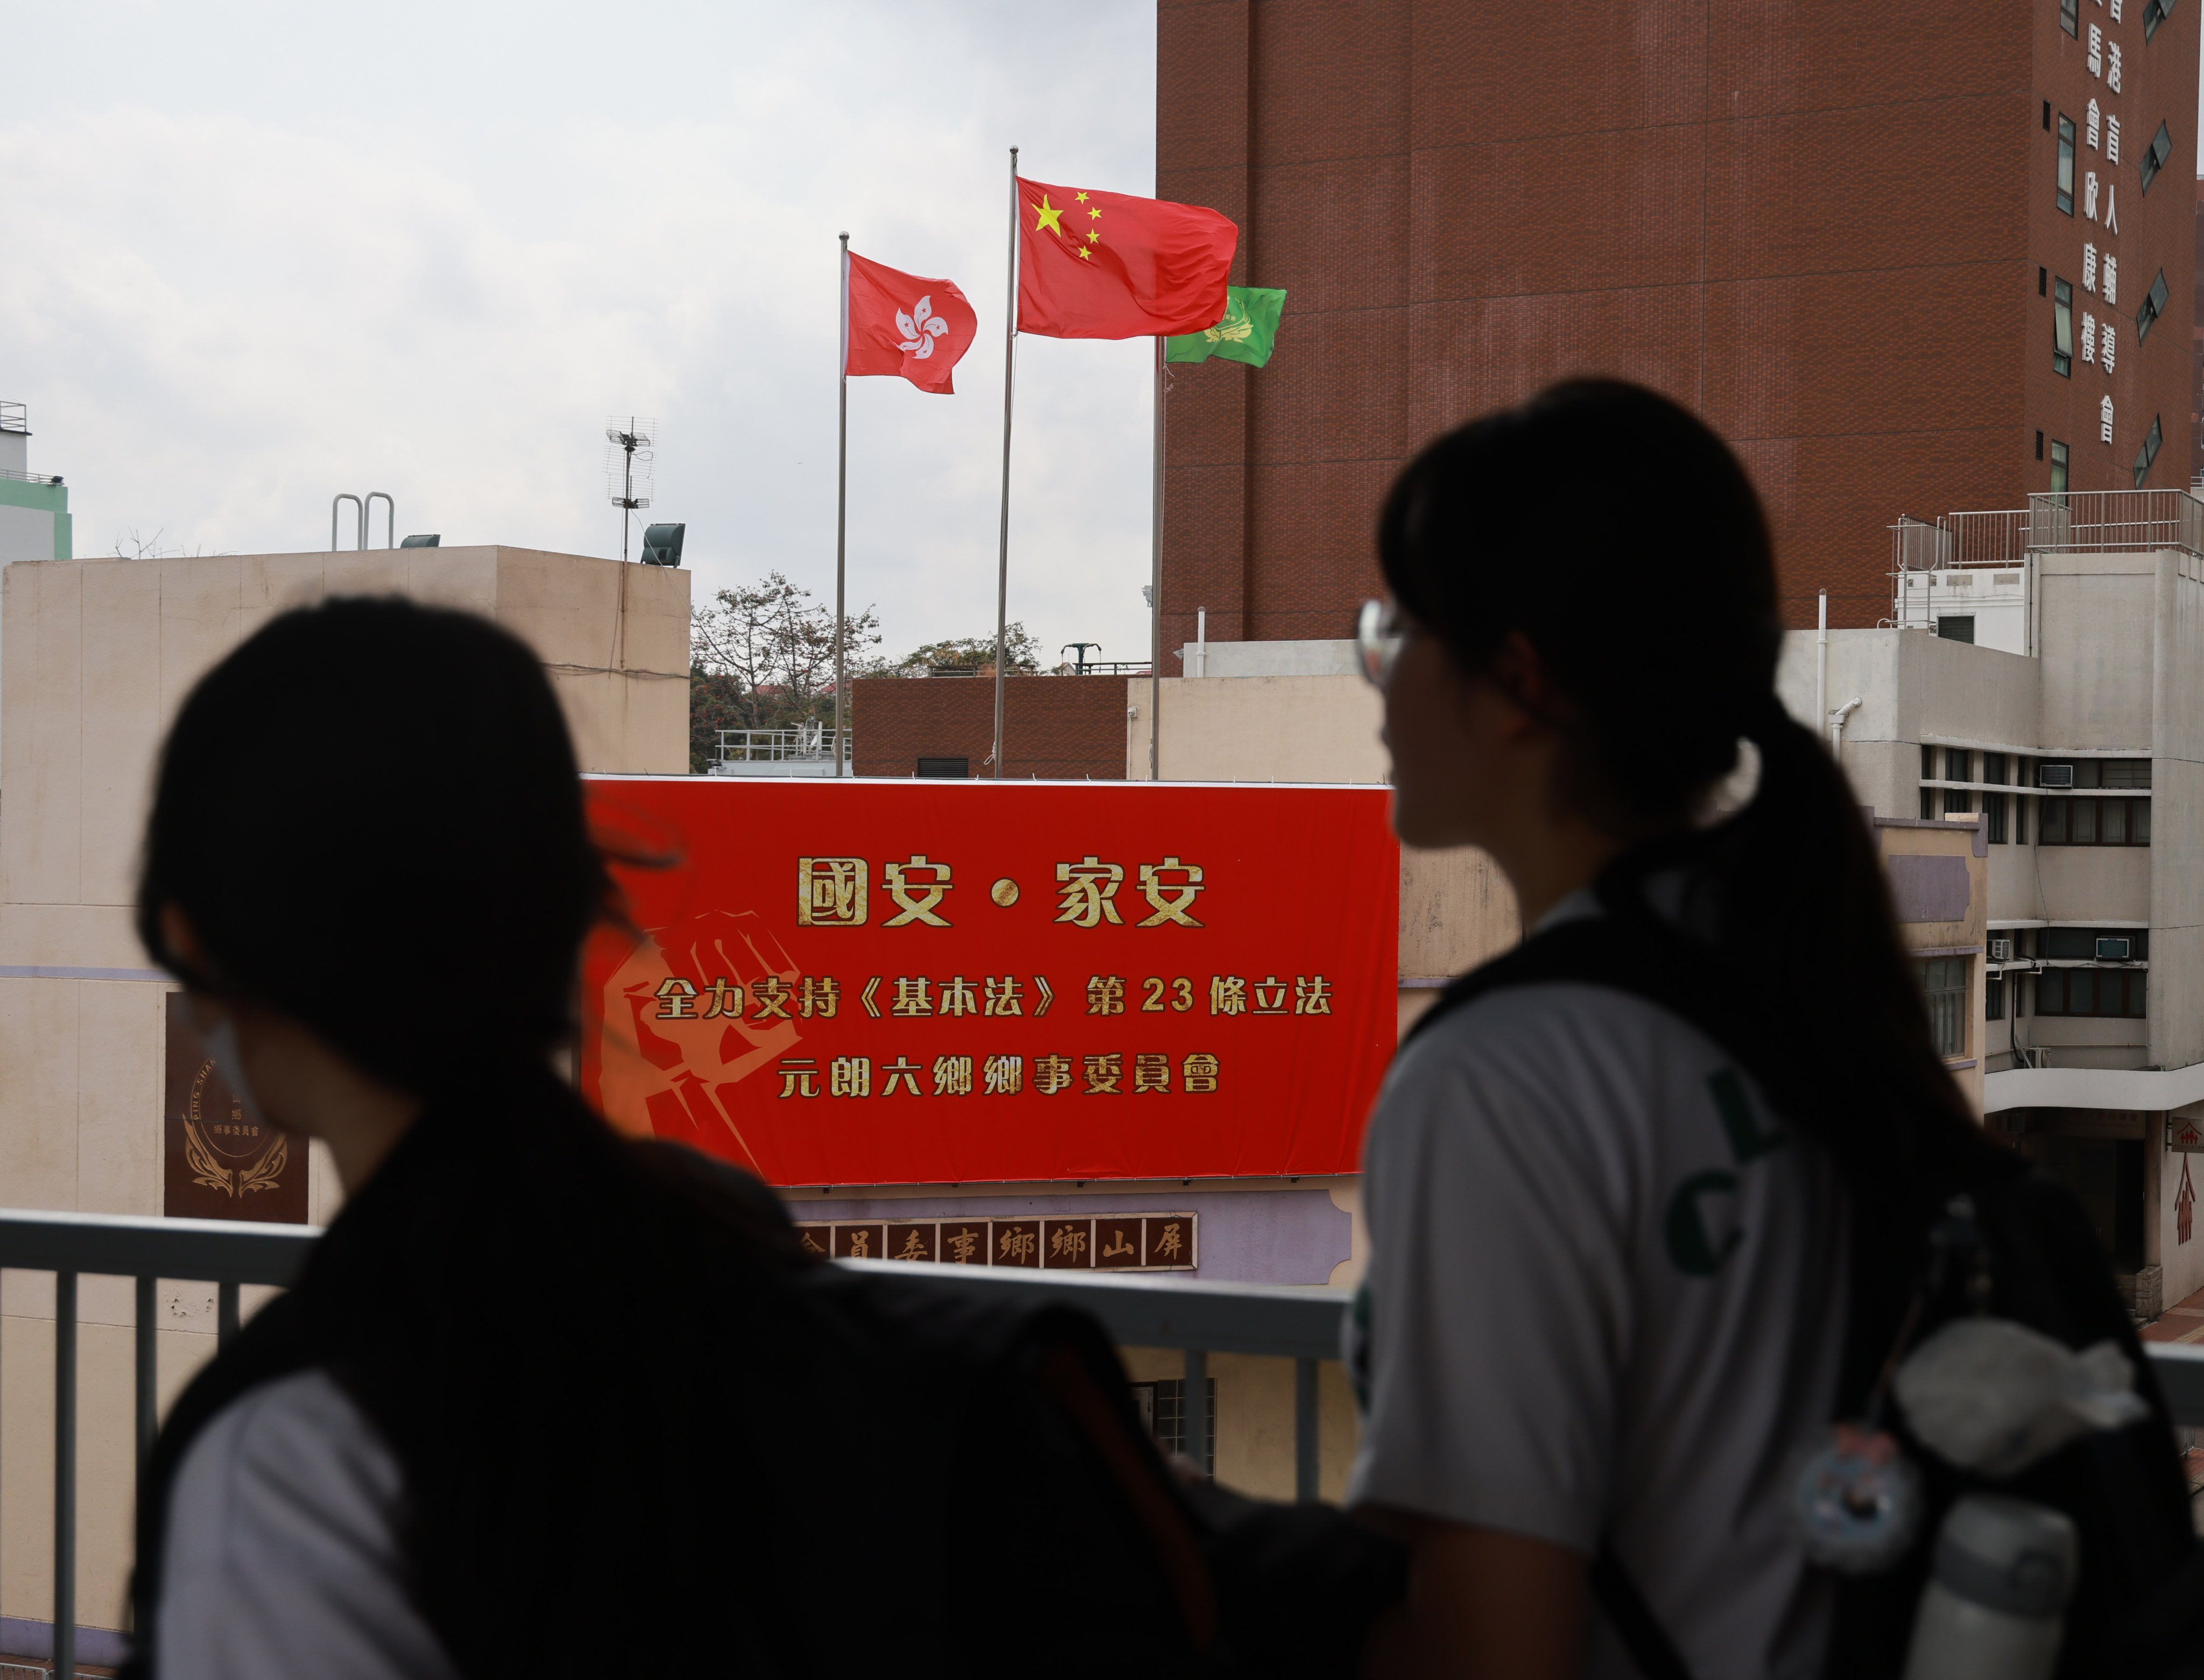 A banner showing support for the proposed legislation hangs outside a rural committee office in Yuen Long. Photo: May Tse